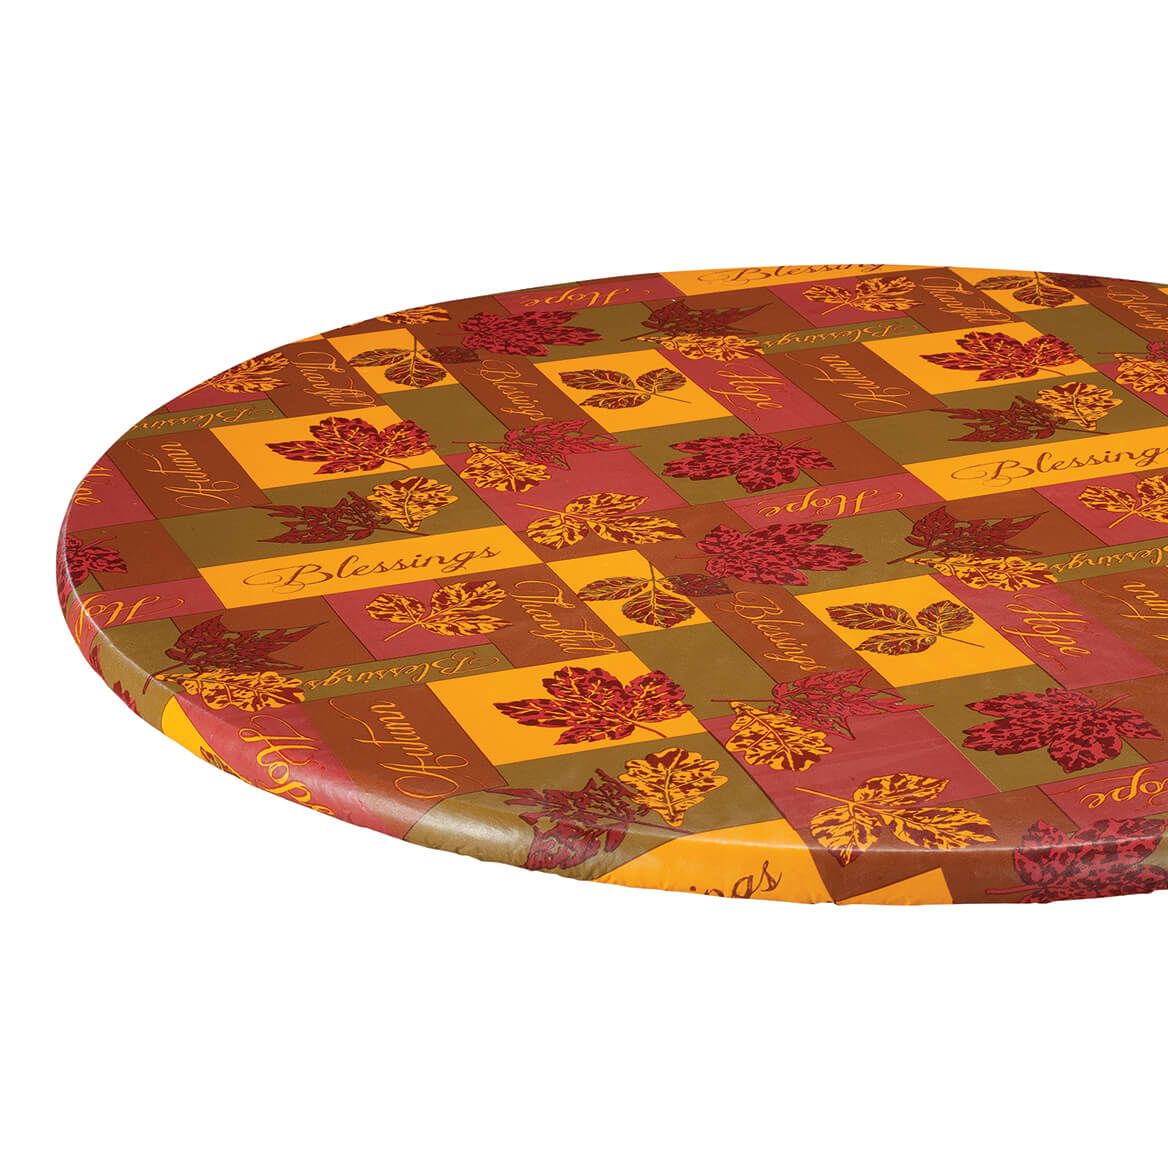 Falling Leaves Blessings Elasticized Table Cover + '-' + 364100